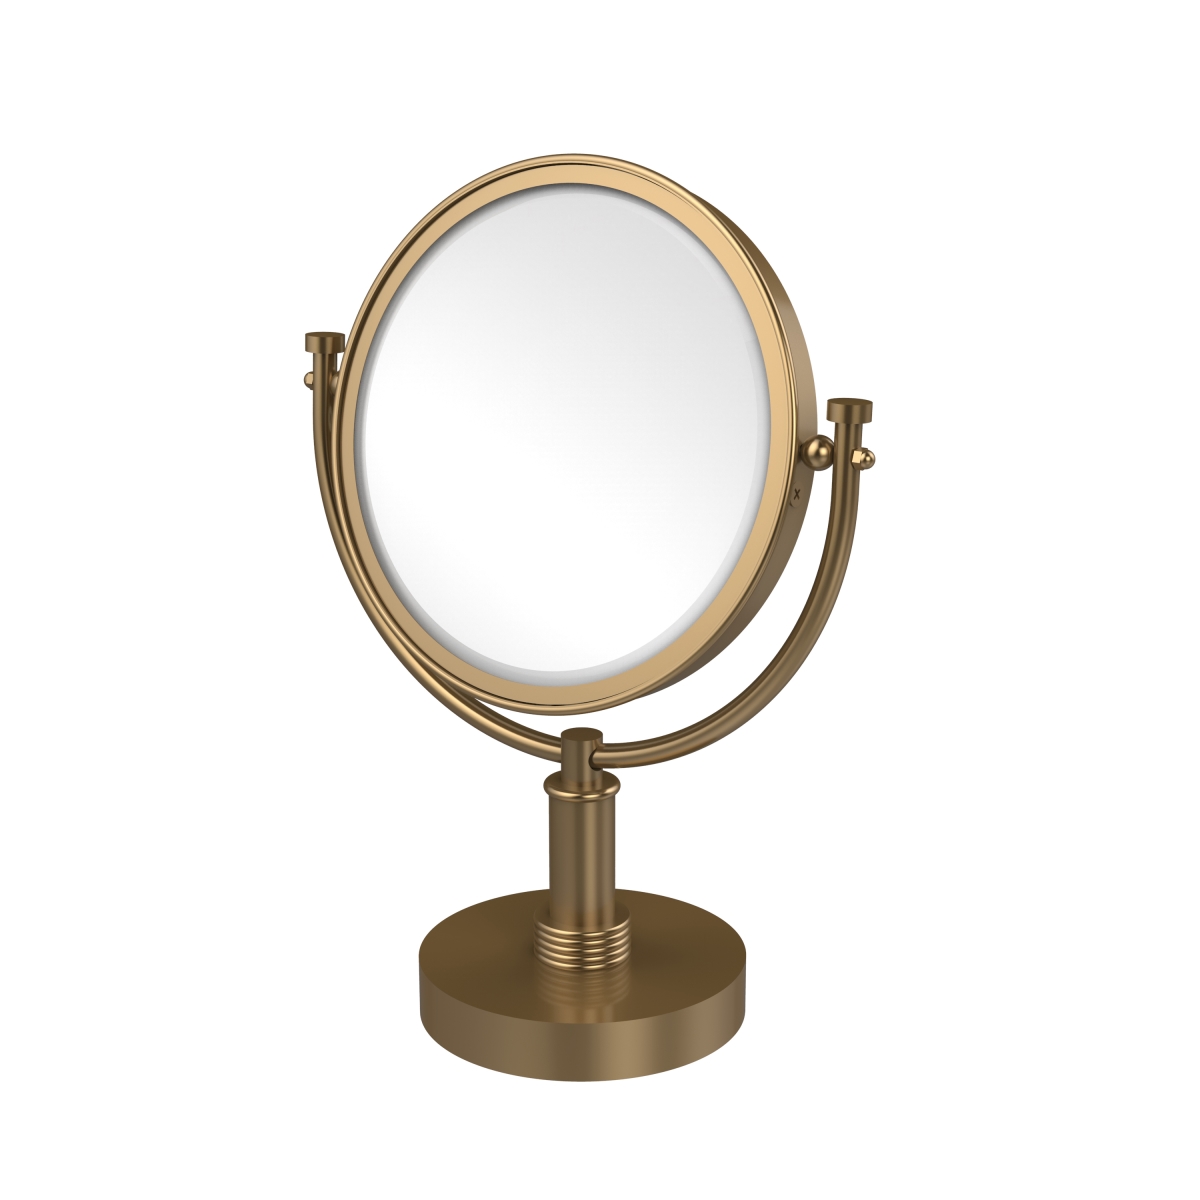 Picture of Allied Brass DM-4G-2X-BBR Grooved Ring Style 8 in. Vanity Top Make-Up Mirror 2X Magnification, Brushed Bronze